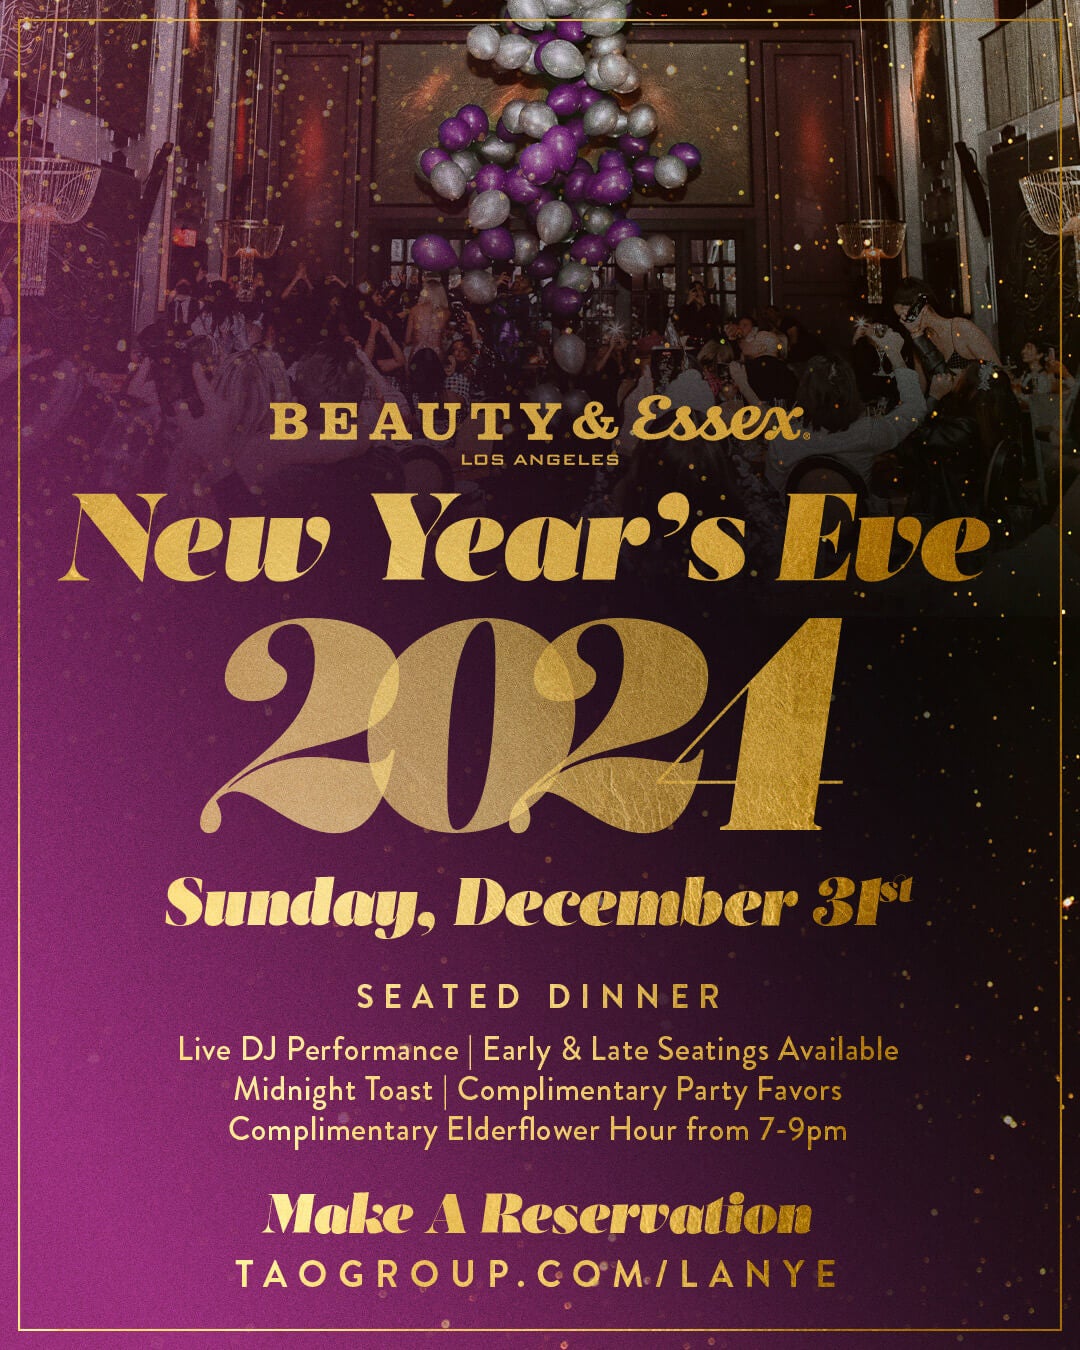 Artist Image - New Year's Eve at Beauty & Essex